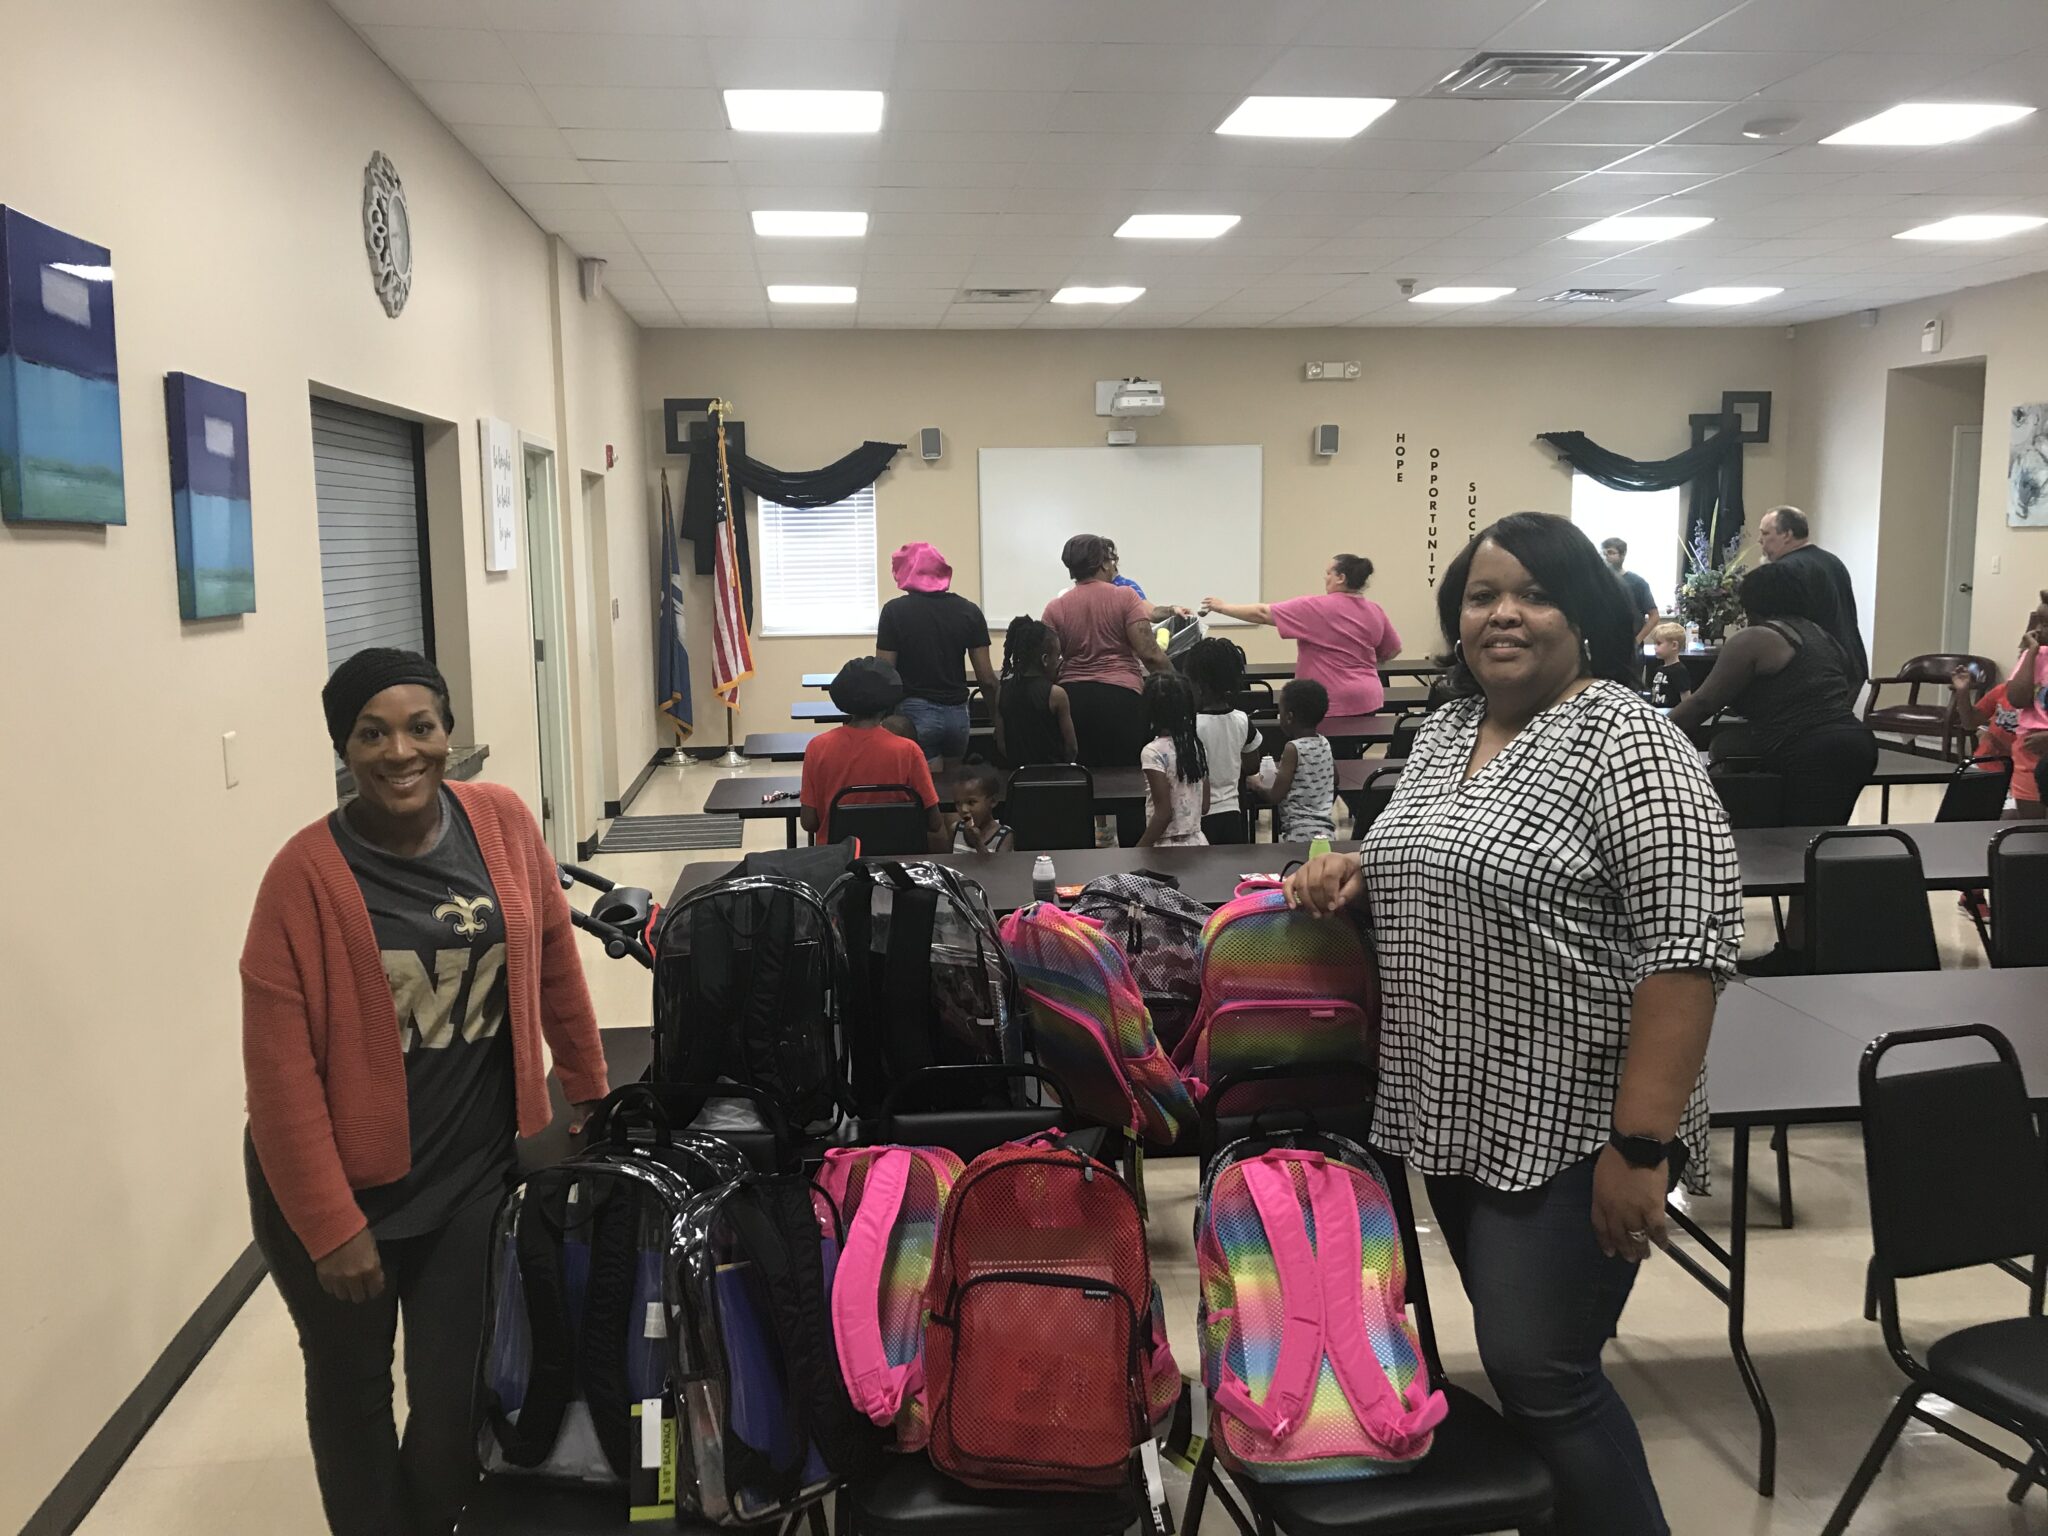 Ms. Shantale Miller And Ms. Karla West With Book Bags